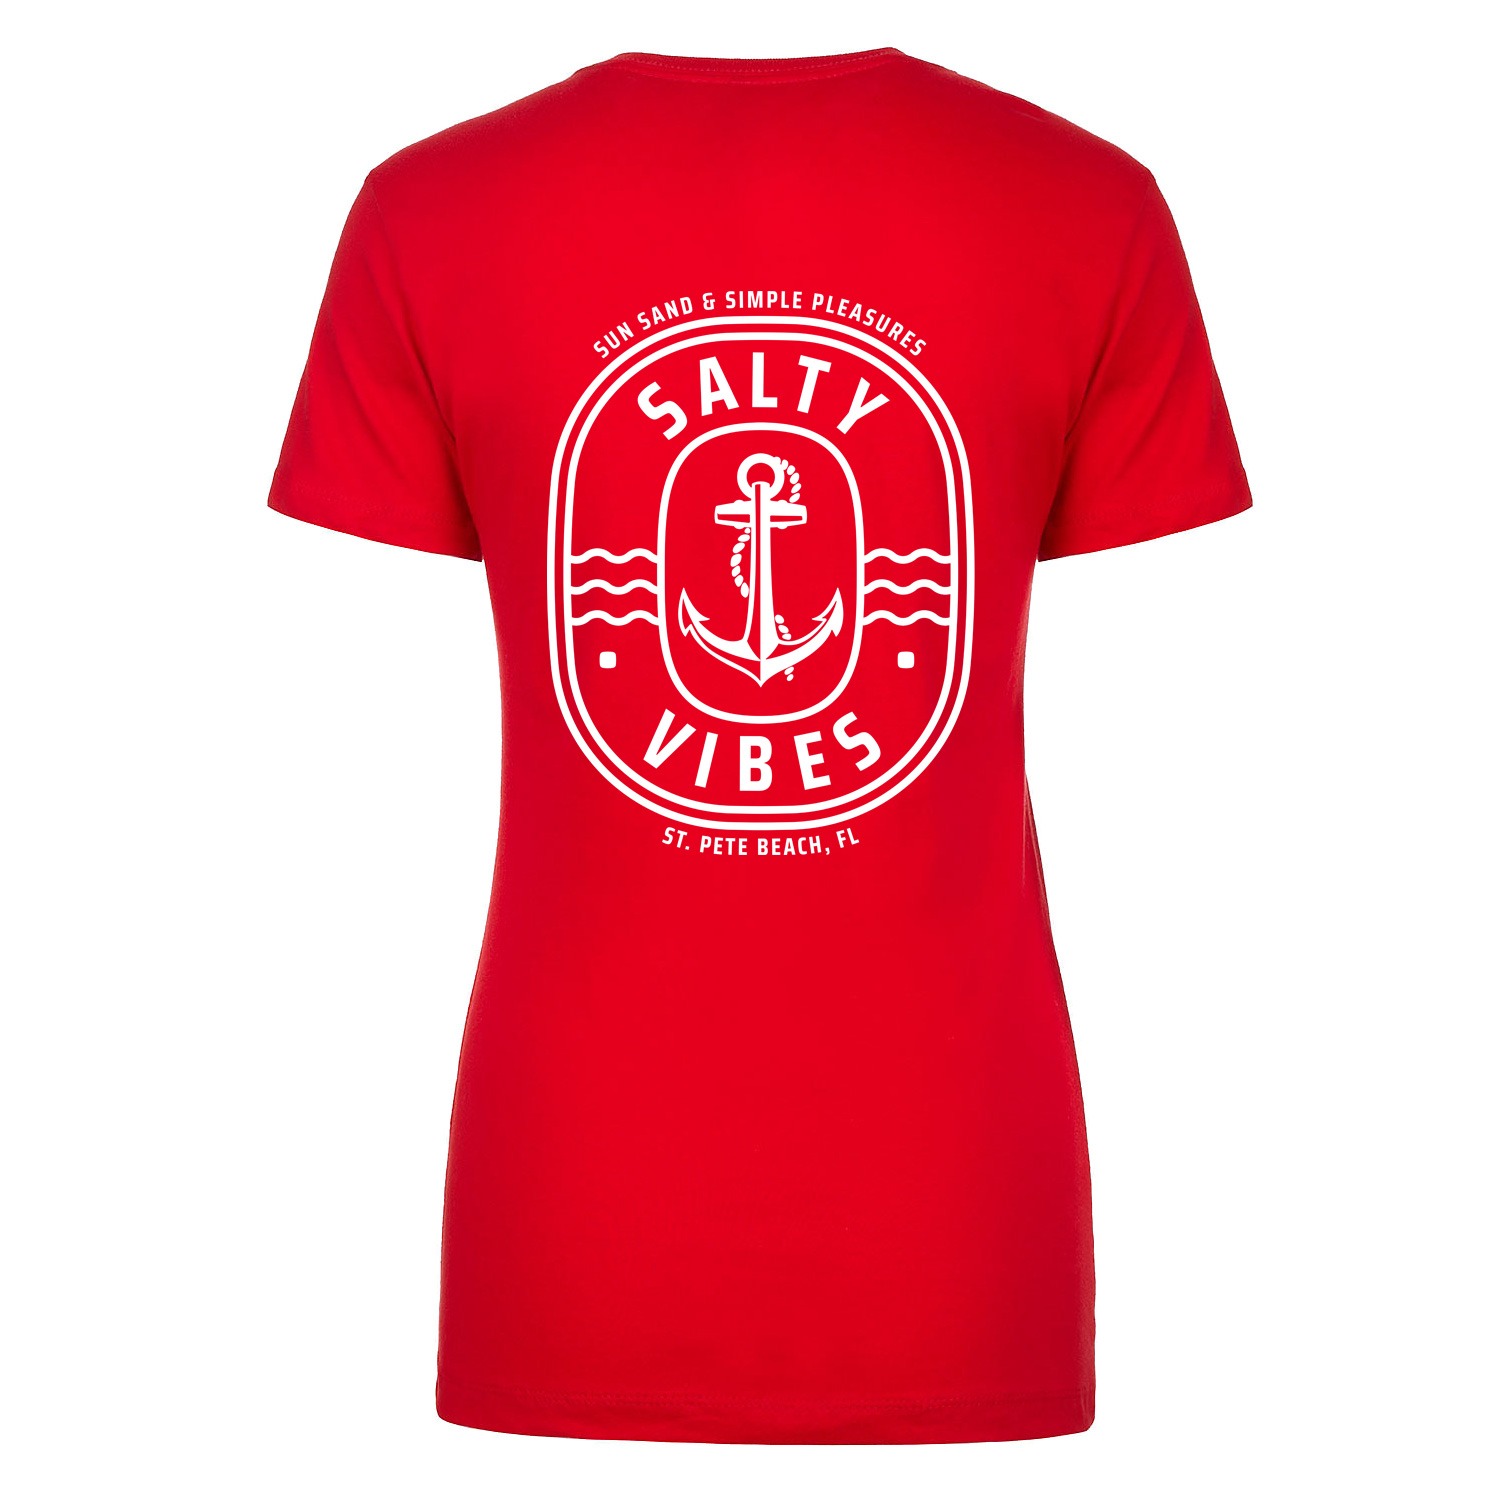 Salty Vibes Anchor Women's Fitted T-shirt - Red, 2XL